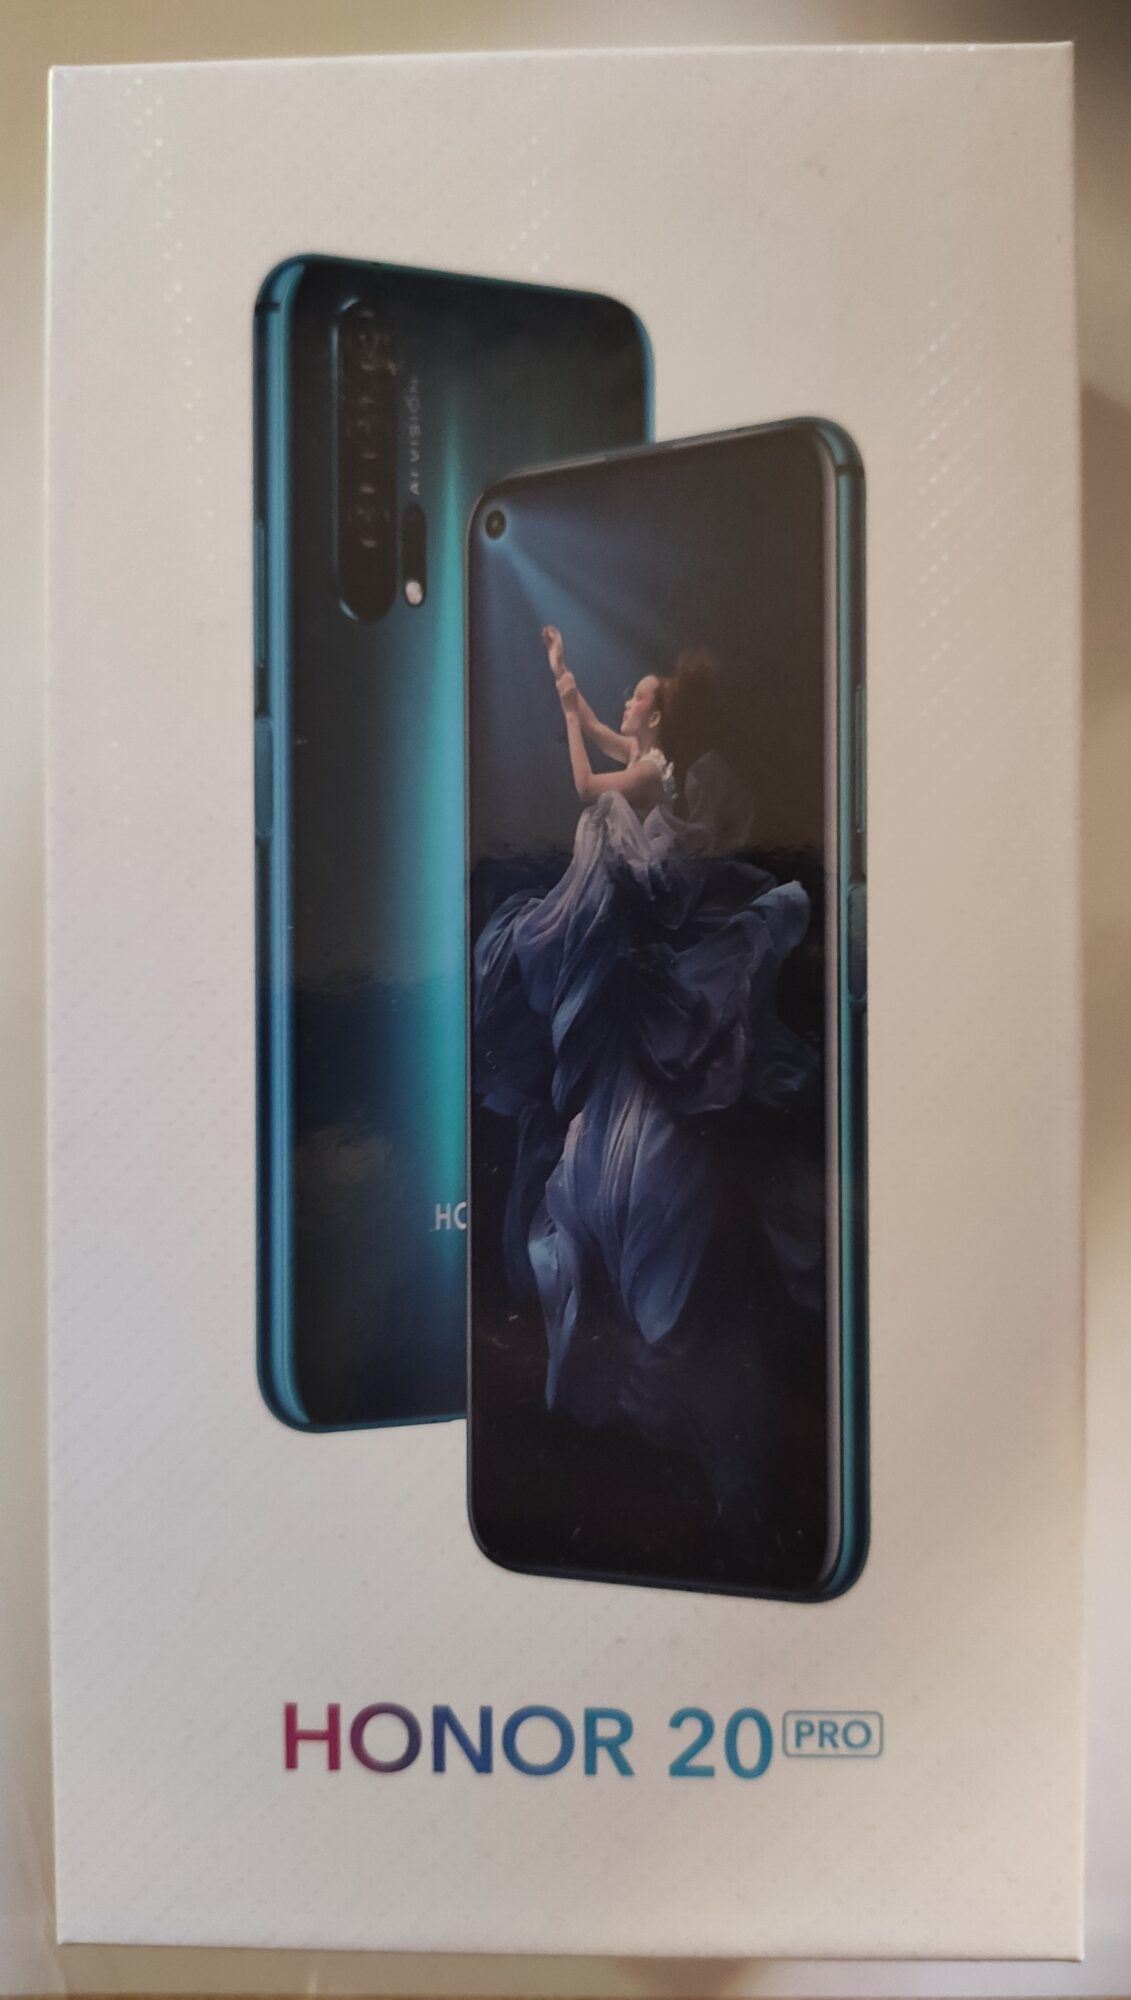 honor 20 pro capteurs 48 MP Android Magic UI dos Huawei reflets verre boîte